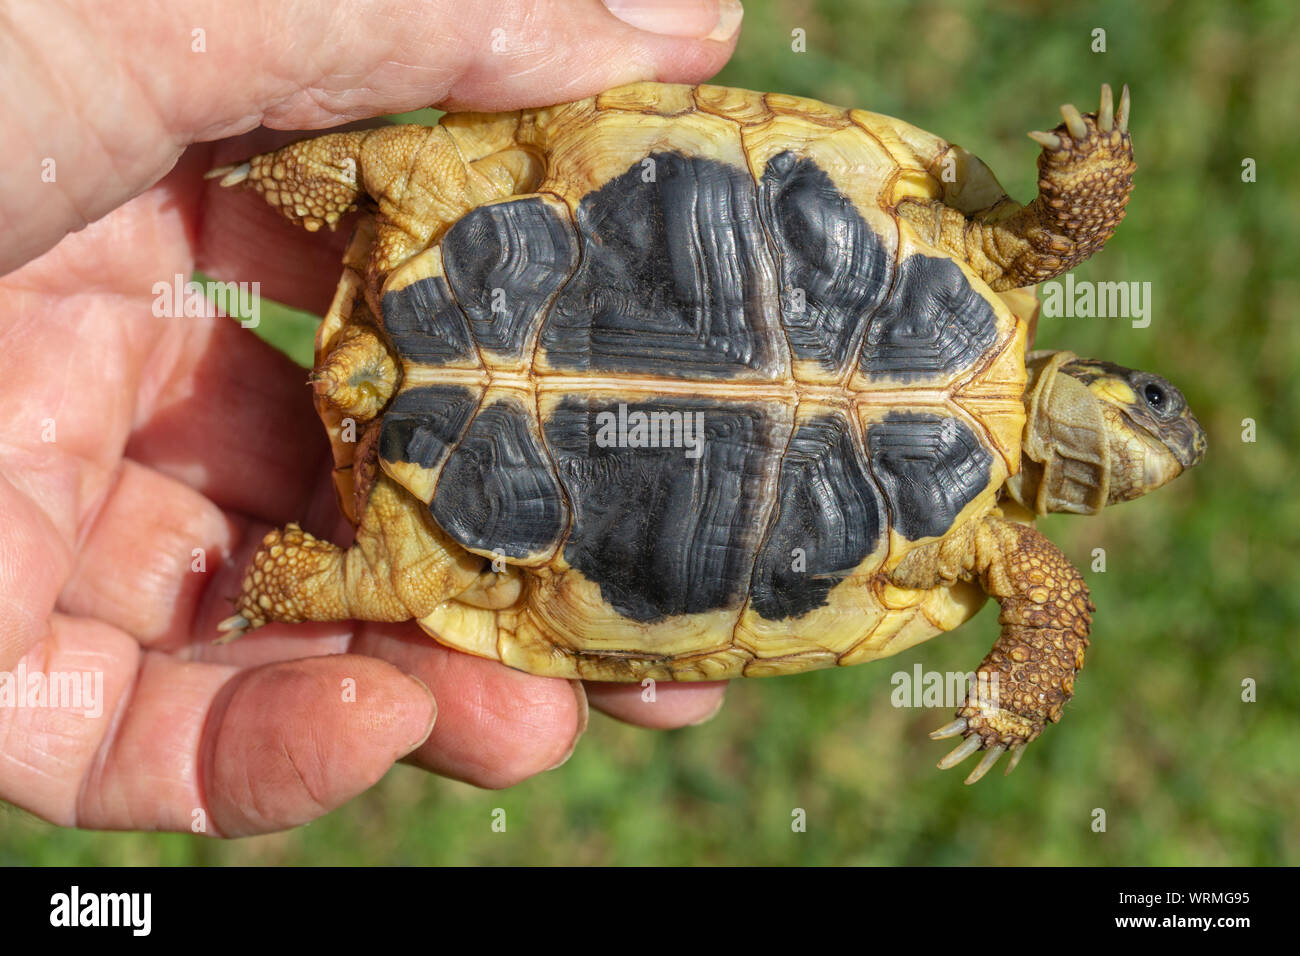 Western Herman’s Tortoise (Testudo hermanni hermanni). Hand held. Close up of the plastron, or underside shell, showing the contrasting continuous yellow and black seams running parallel, side by side, from front to back. An identification feature for this the nominate subspecies. Stock Photo